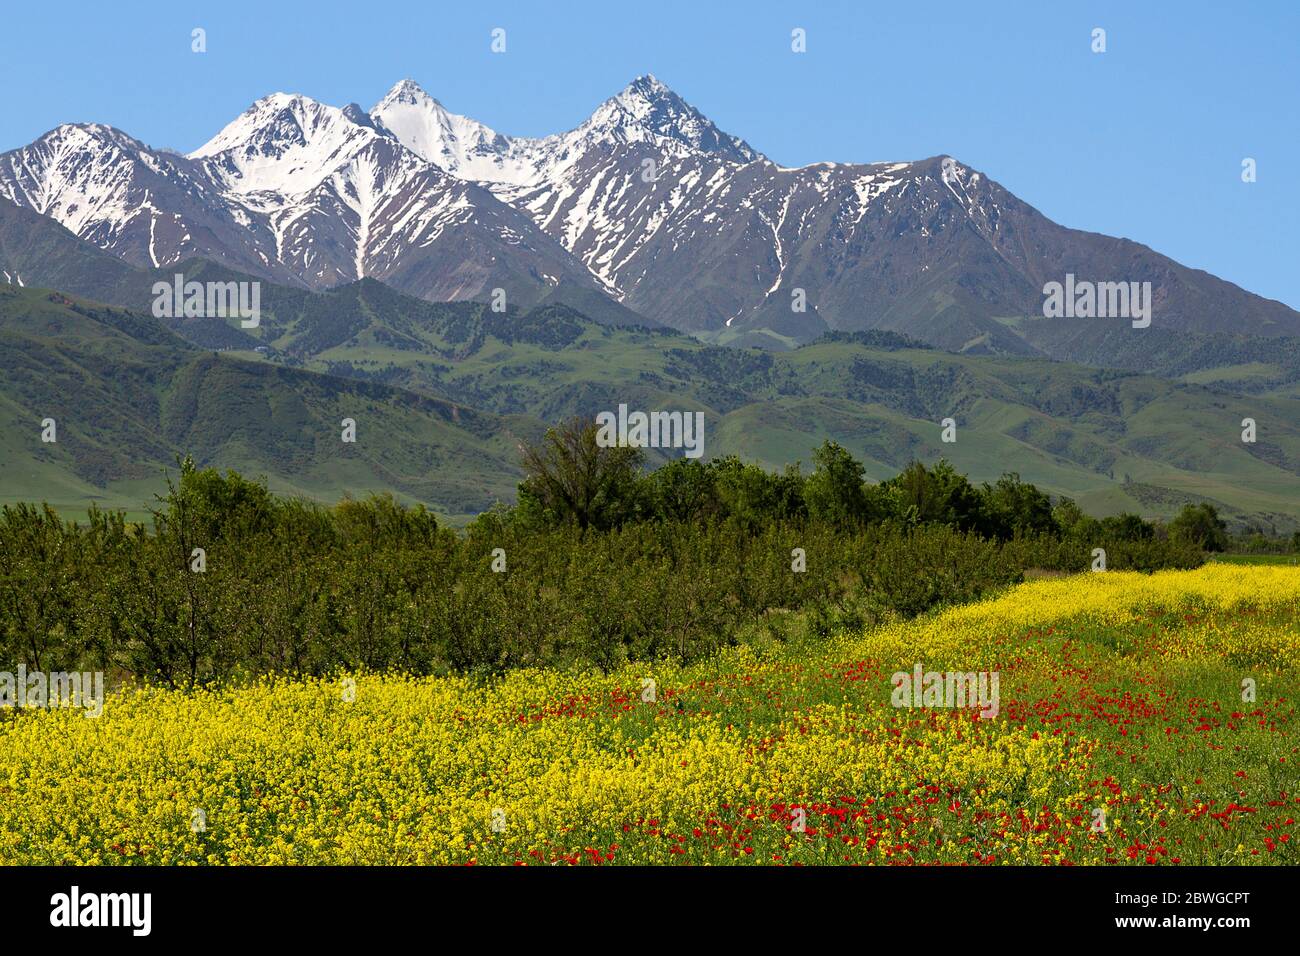 Spring flowers with Tien Shan mountains in the background, Bishkek, Kyrgyzstan Stock Photo